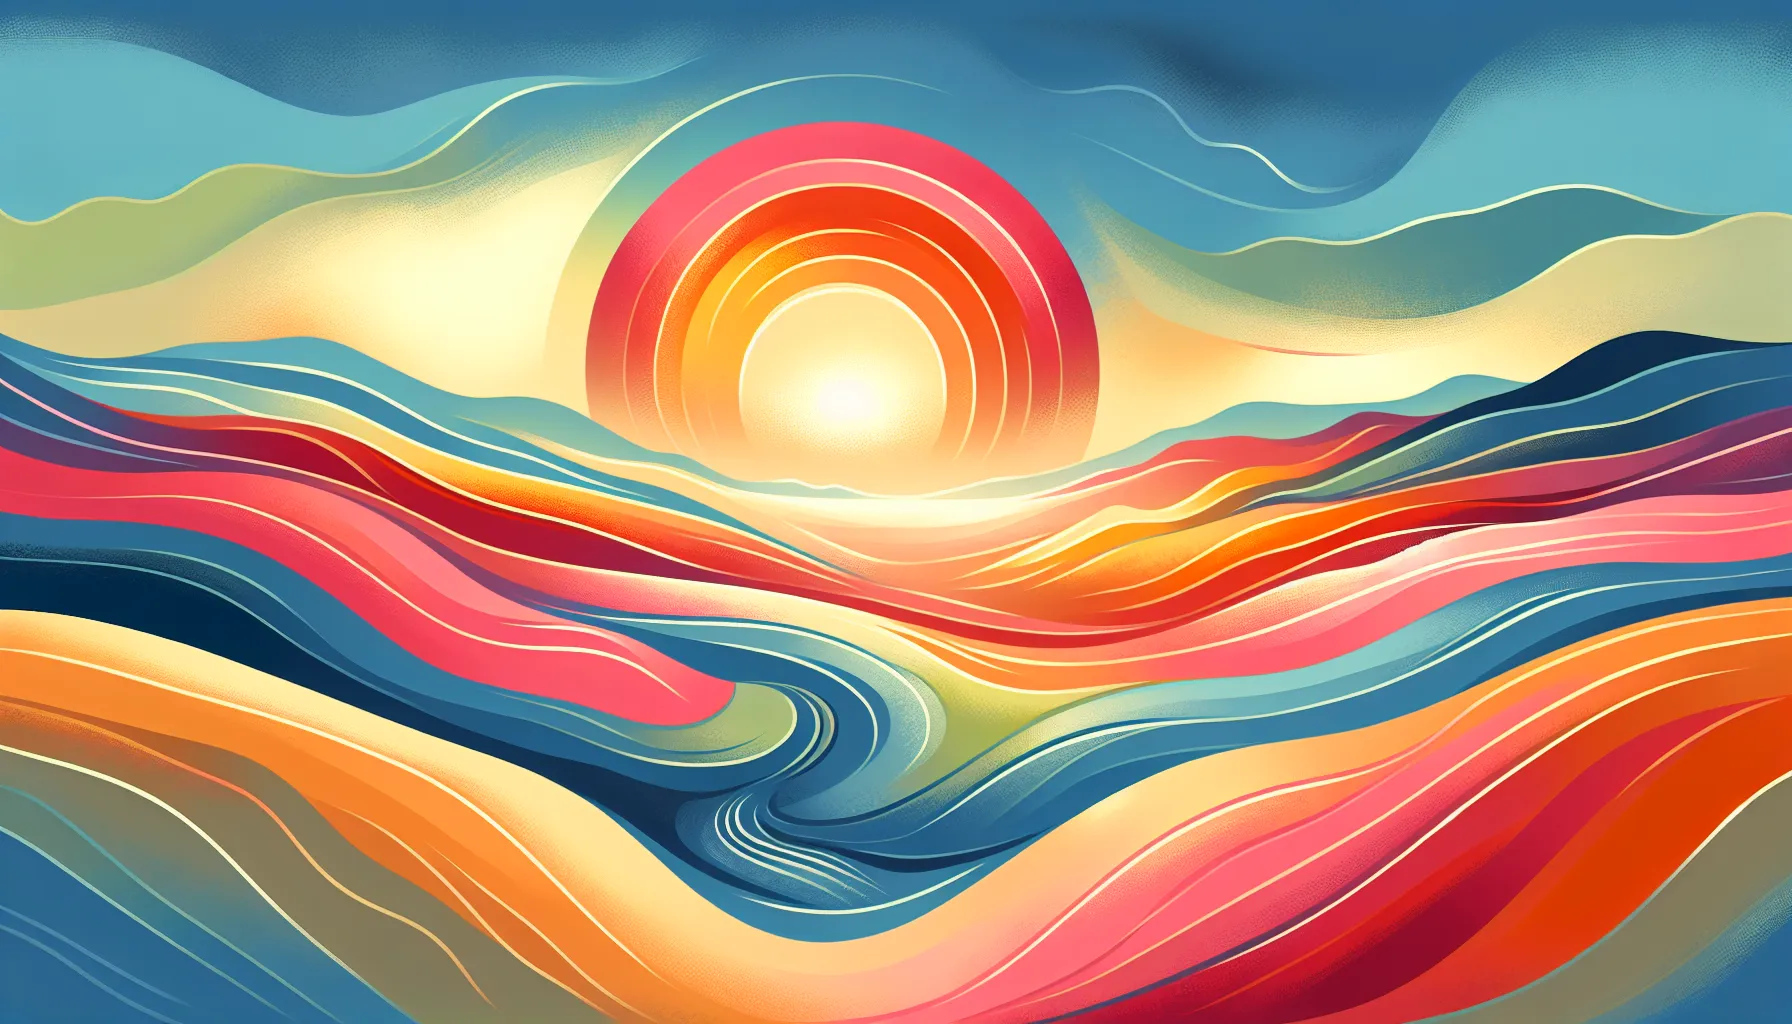 This image symbolizes the undulating path of recovery, where the warmth of dawn's light represents hope and renewal, underscoring the article's message that every sunrise heralds new beginnings on the horizon of self-discovery.